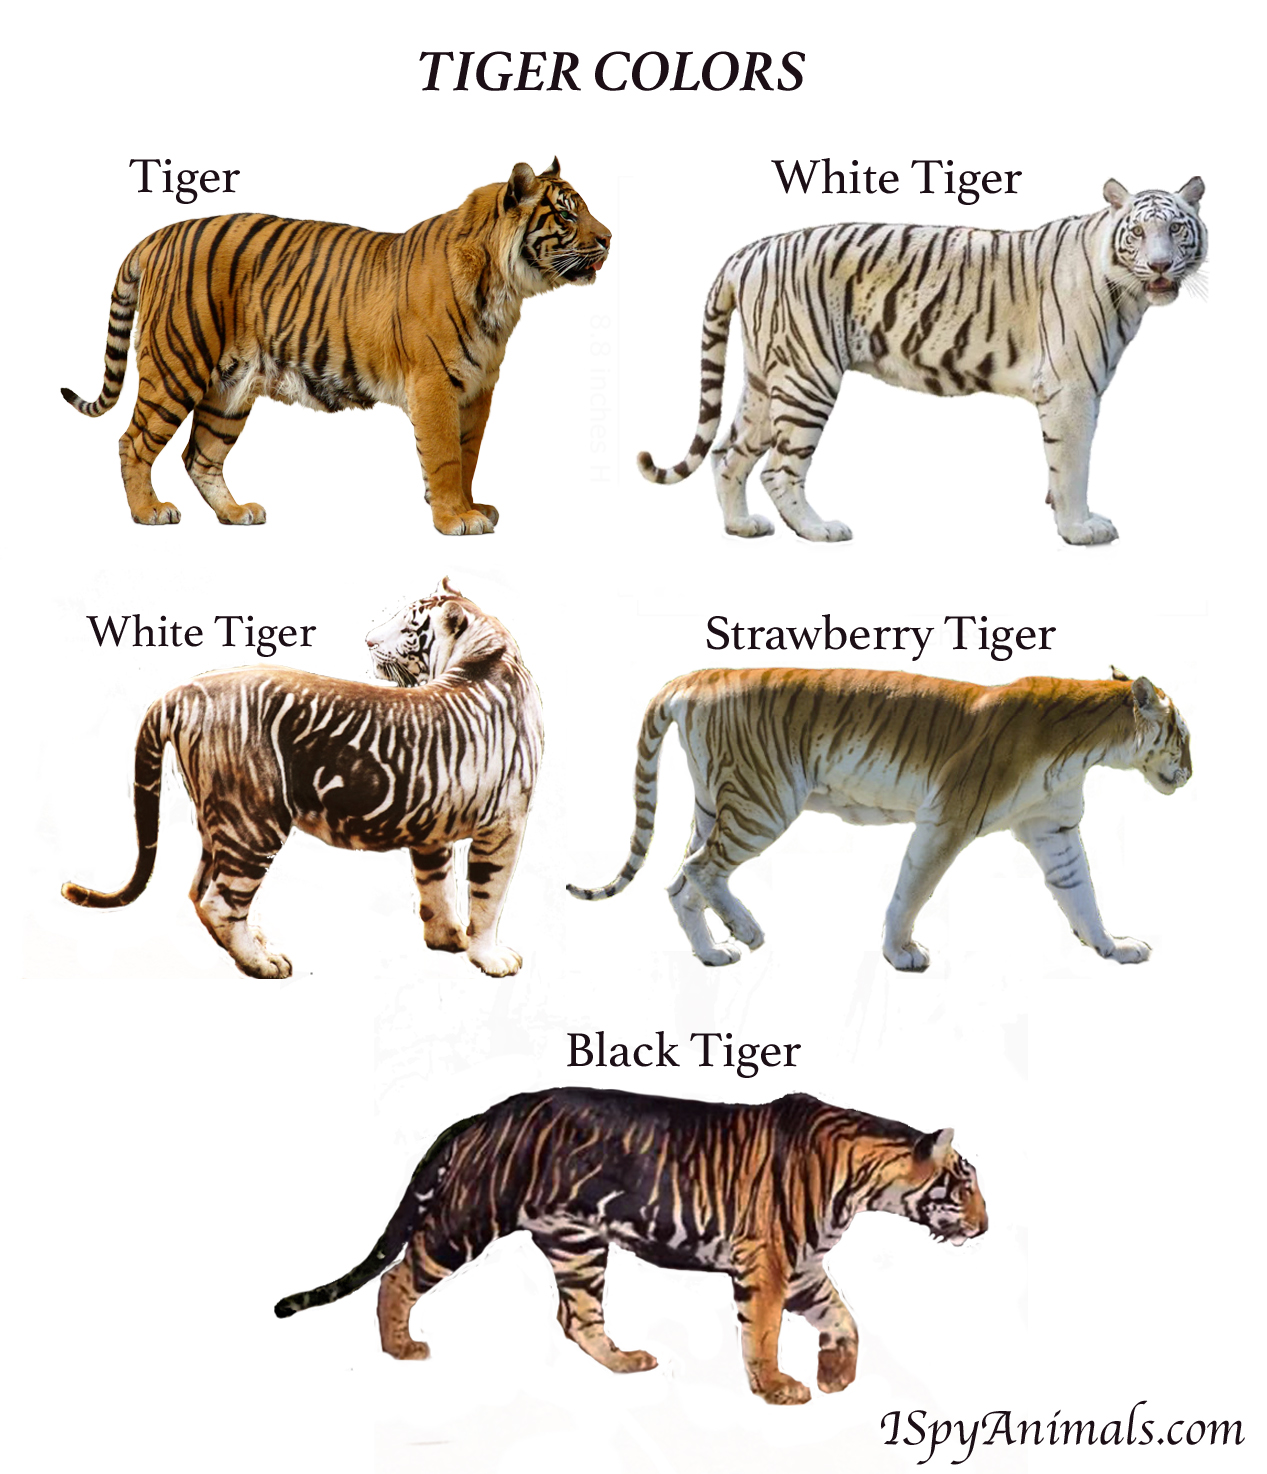 I Spy Animals: The Colors of Tigers